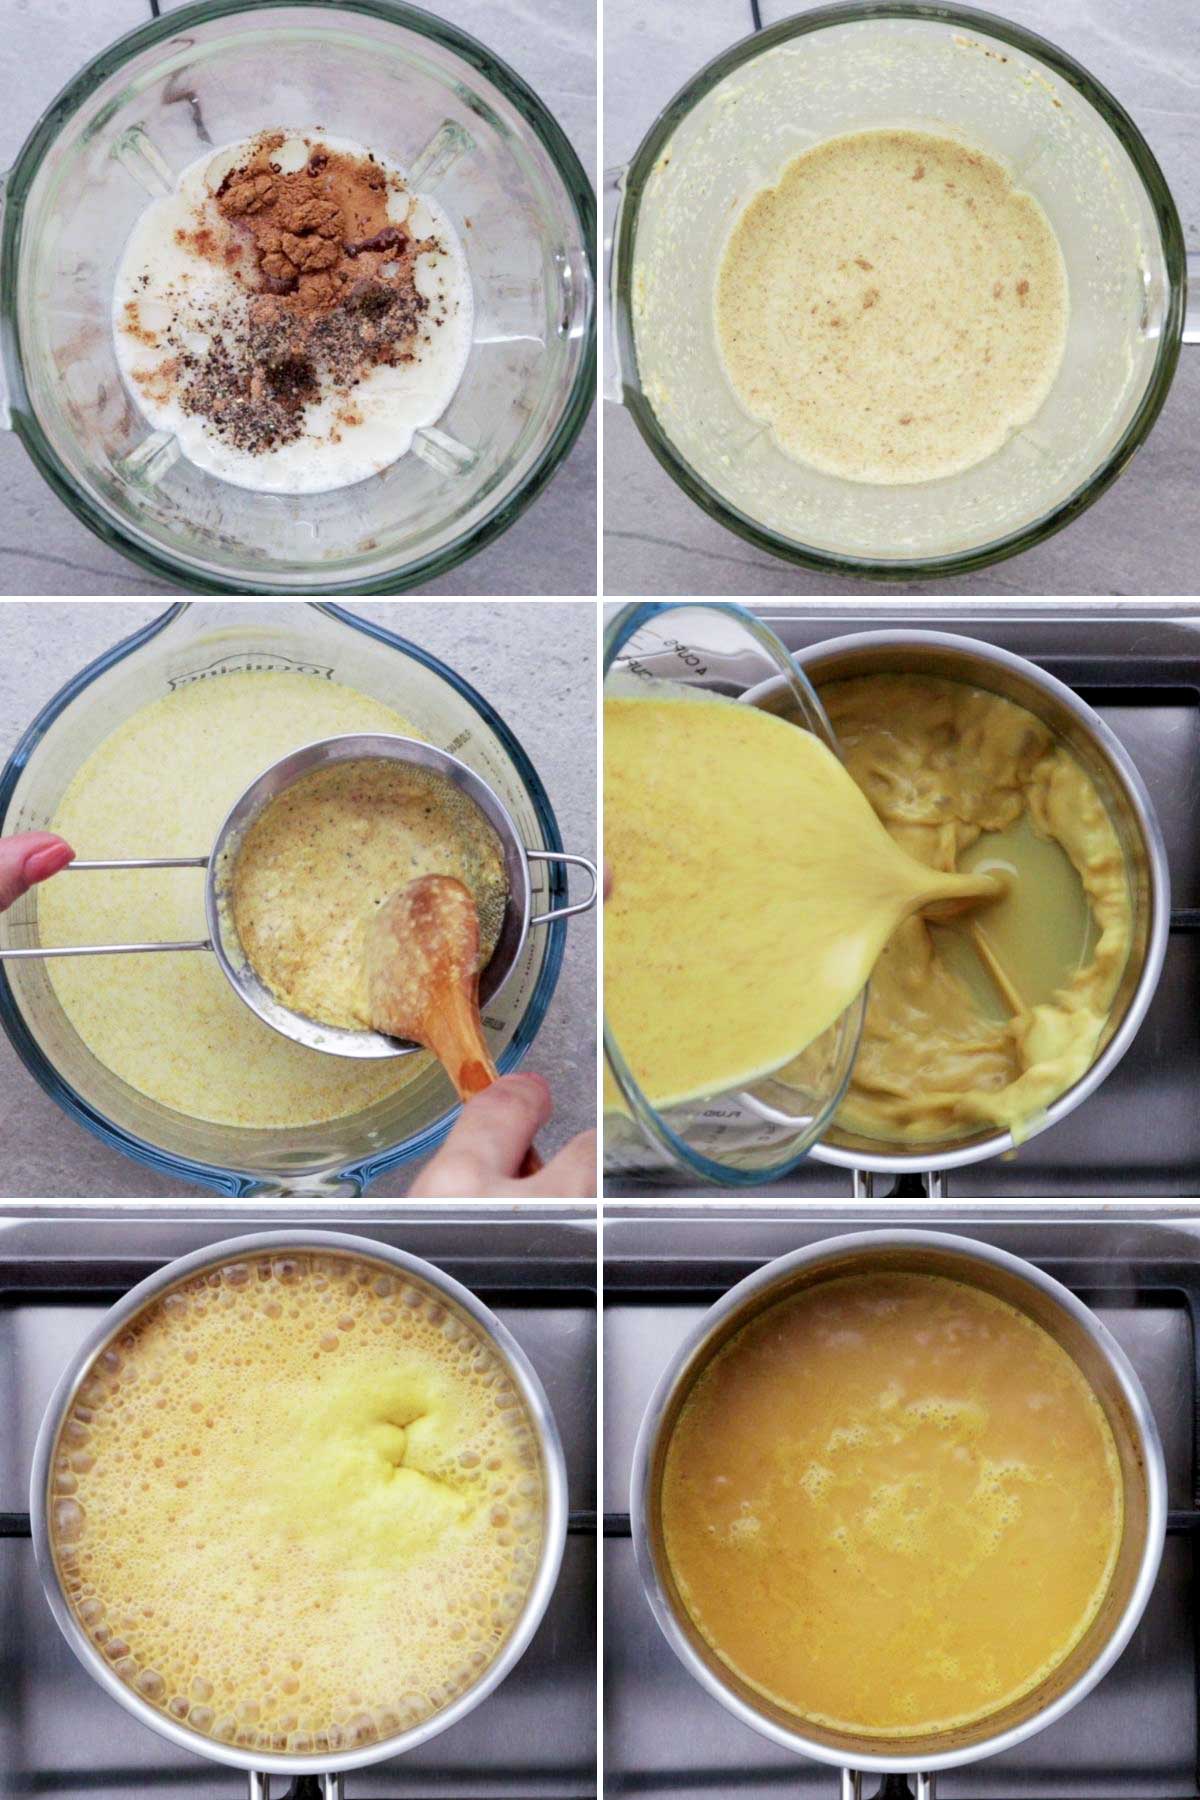 Step by step procedure on how to make Golden milk.